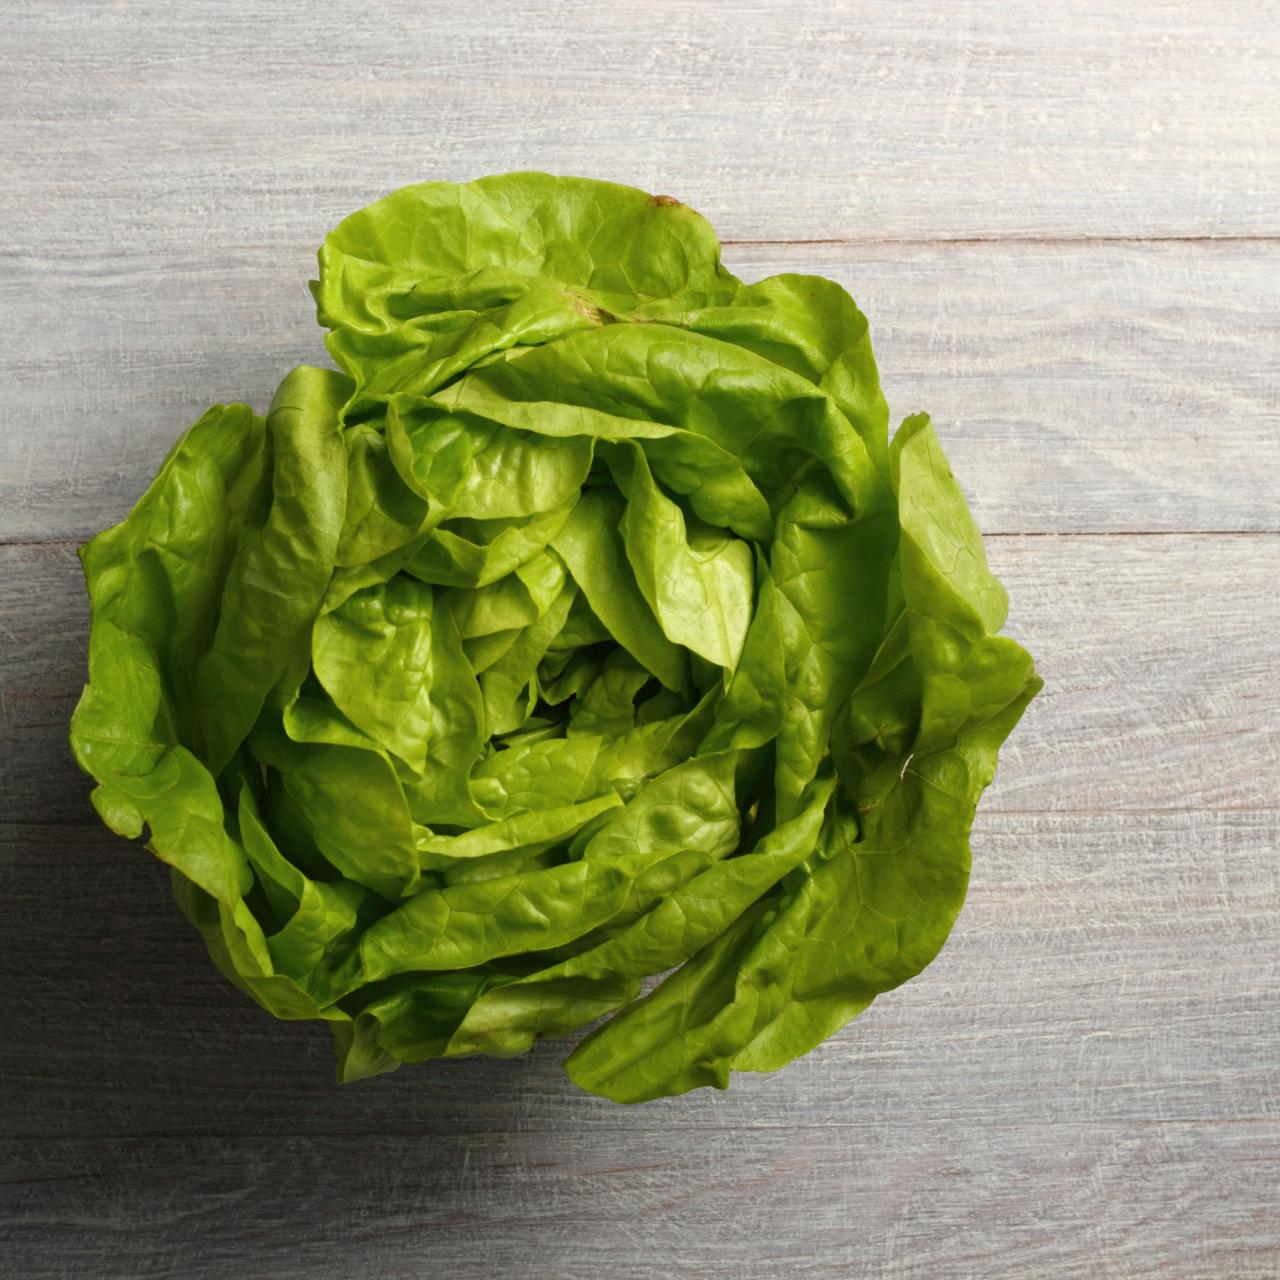 Organic Boston Butter Lettuce at Whole Foods Market